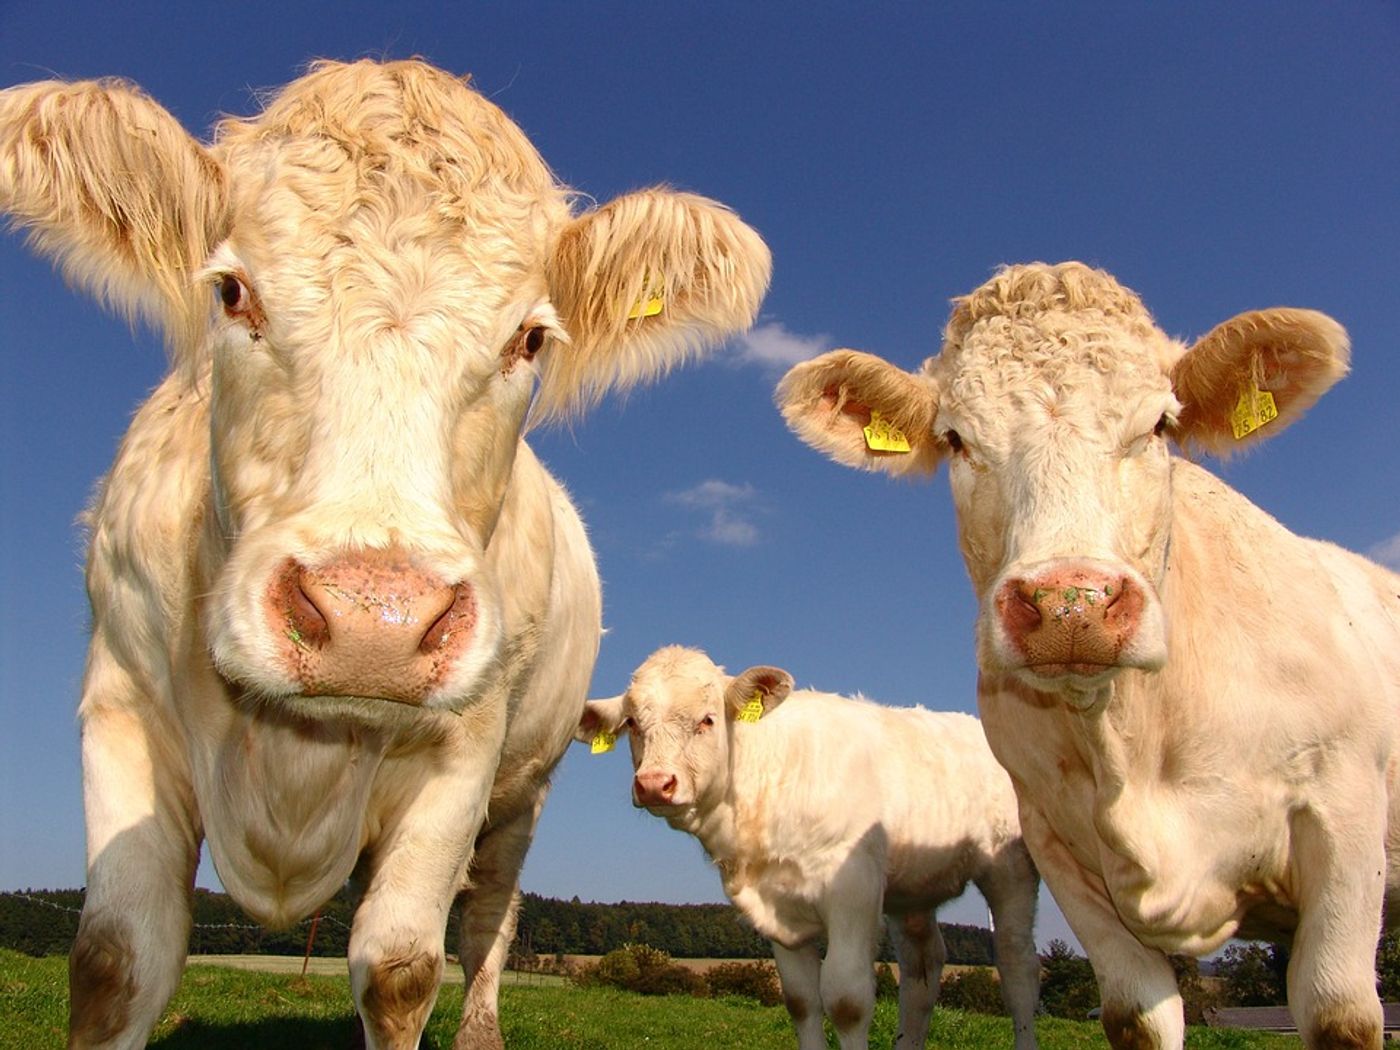 Methane emissions come largely from livestock farming and agriculture. Photo: Pixabay